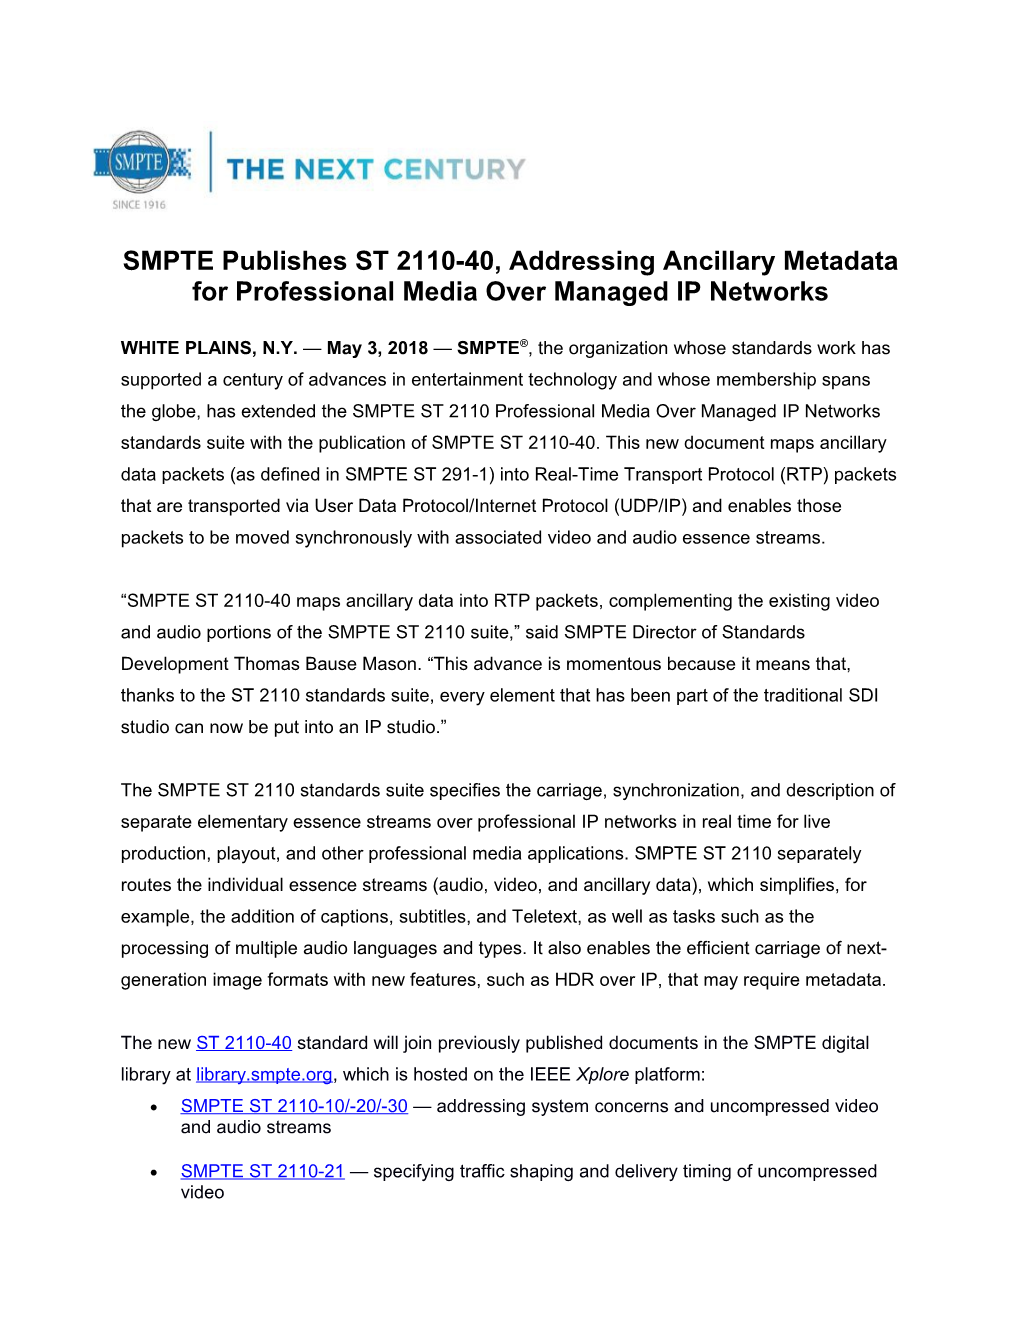 SMPTE Publishes ST 2110-40, Addressing Ancillary Metadata for Professional Media Over